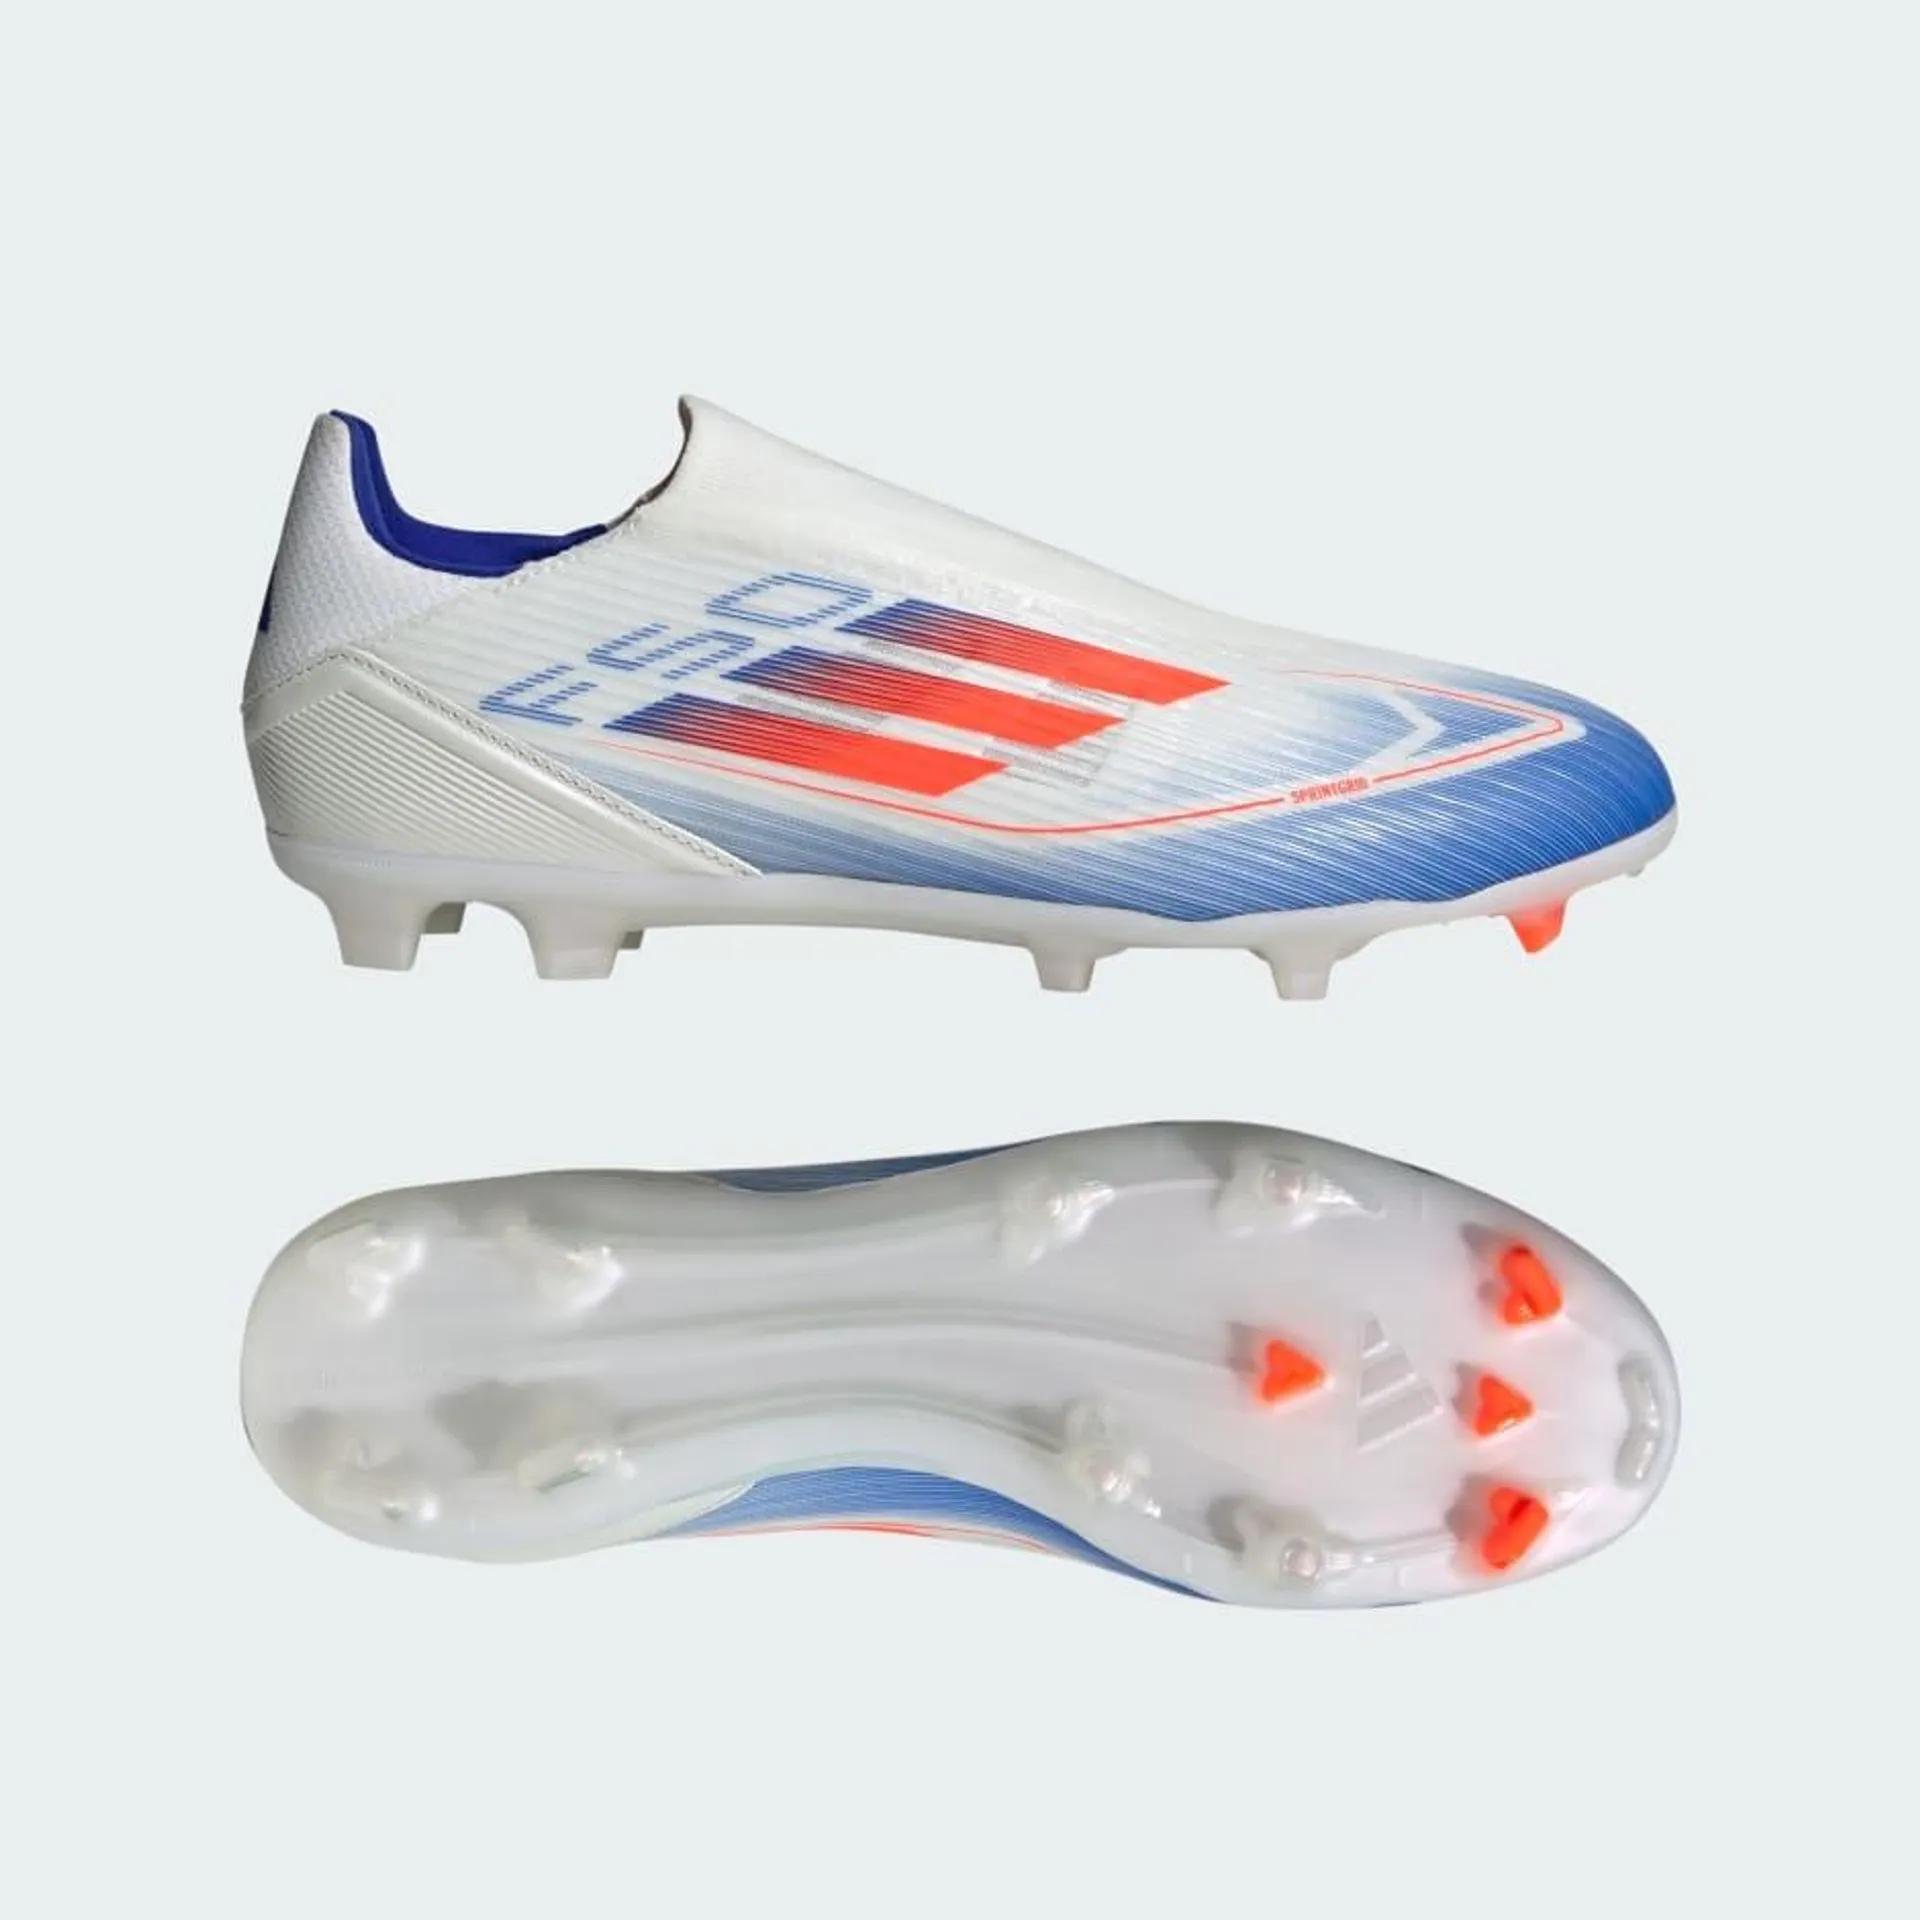 F50 League Laceless Firm/Multi-Ground Boots